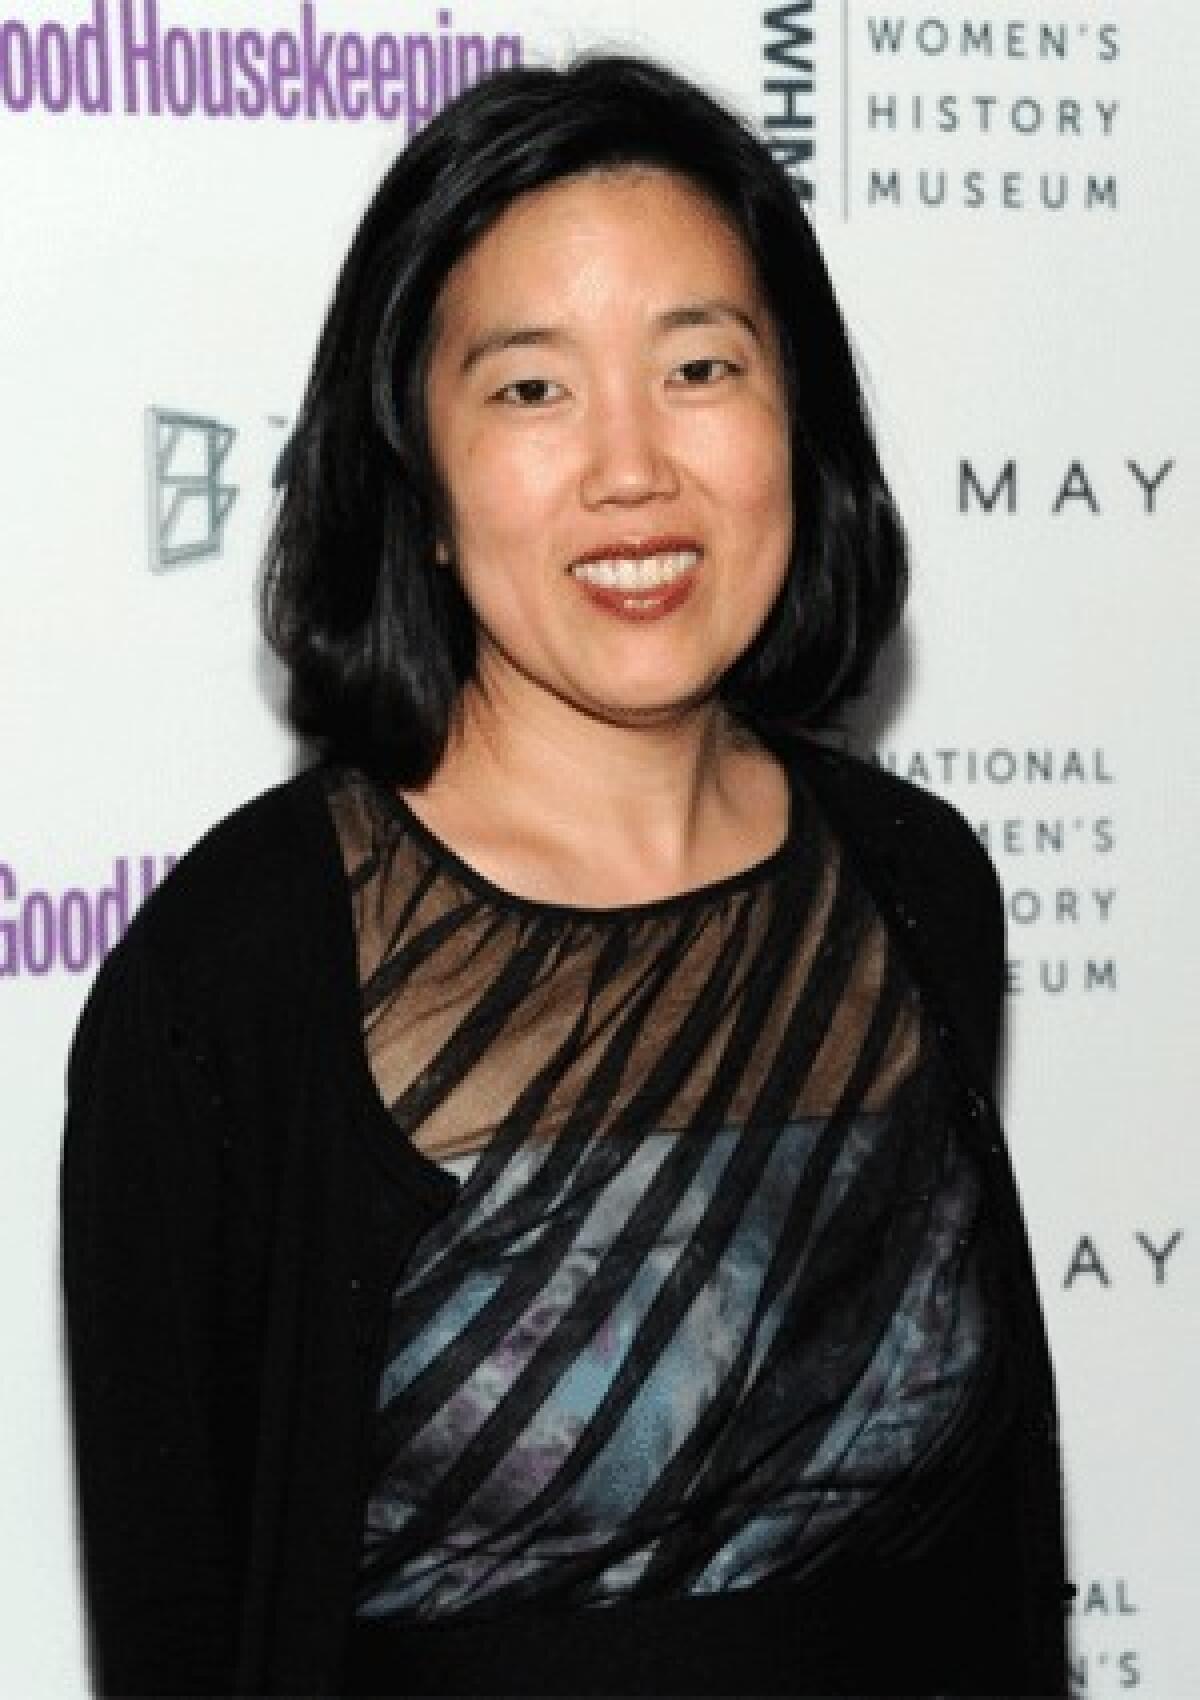 Michelle Rhee is seen at Good Housekeeping's 'Shine On' Women Making History theatrical event at Radio City Music Hall on April 12, 2011 in New York. Credit: